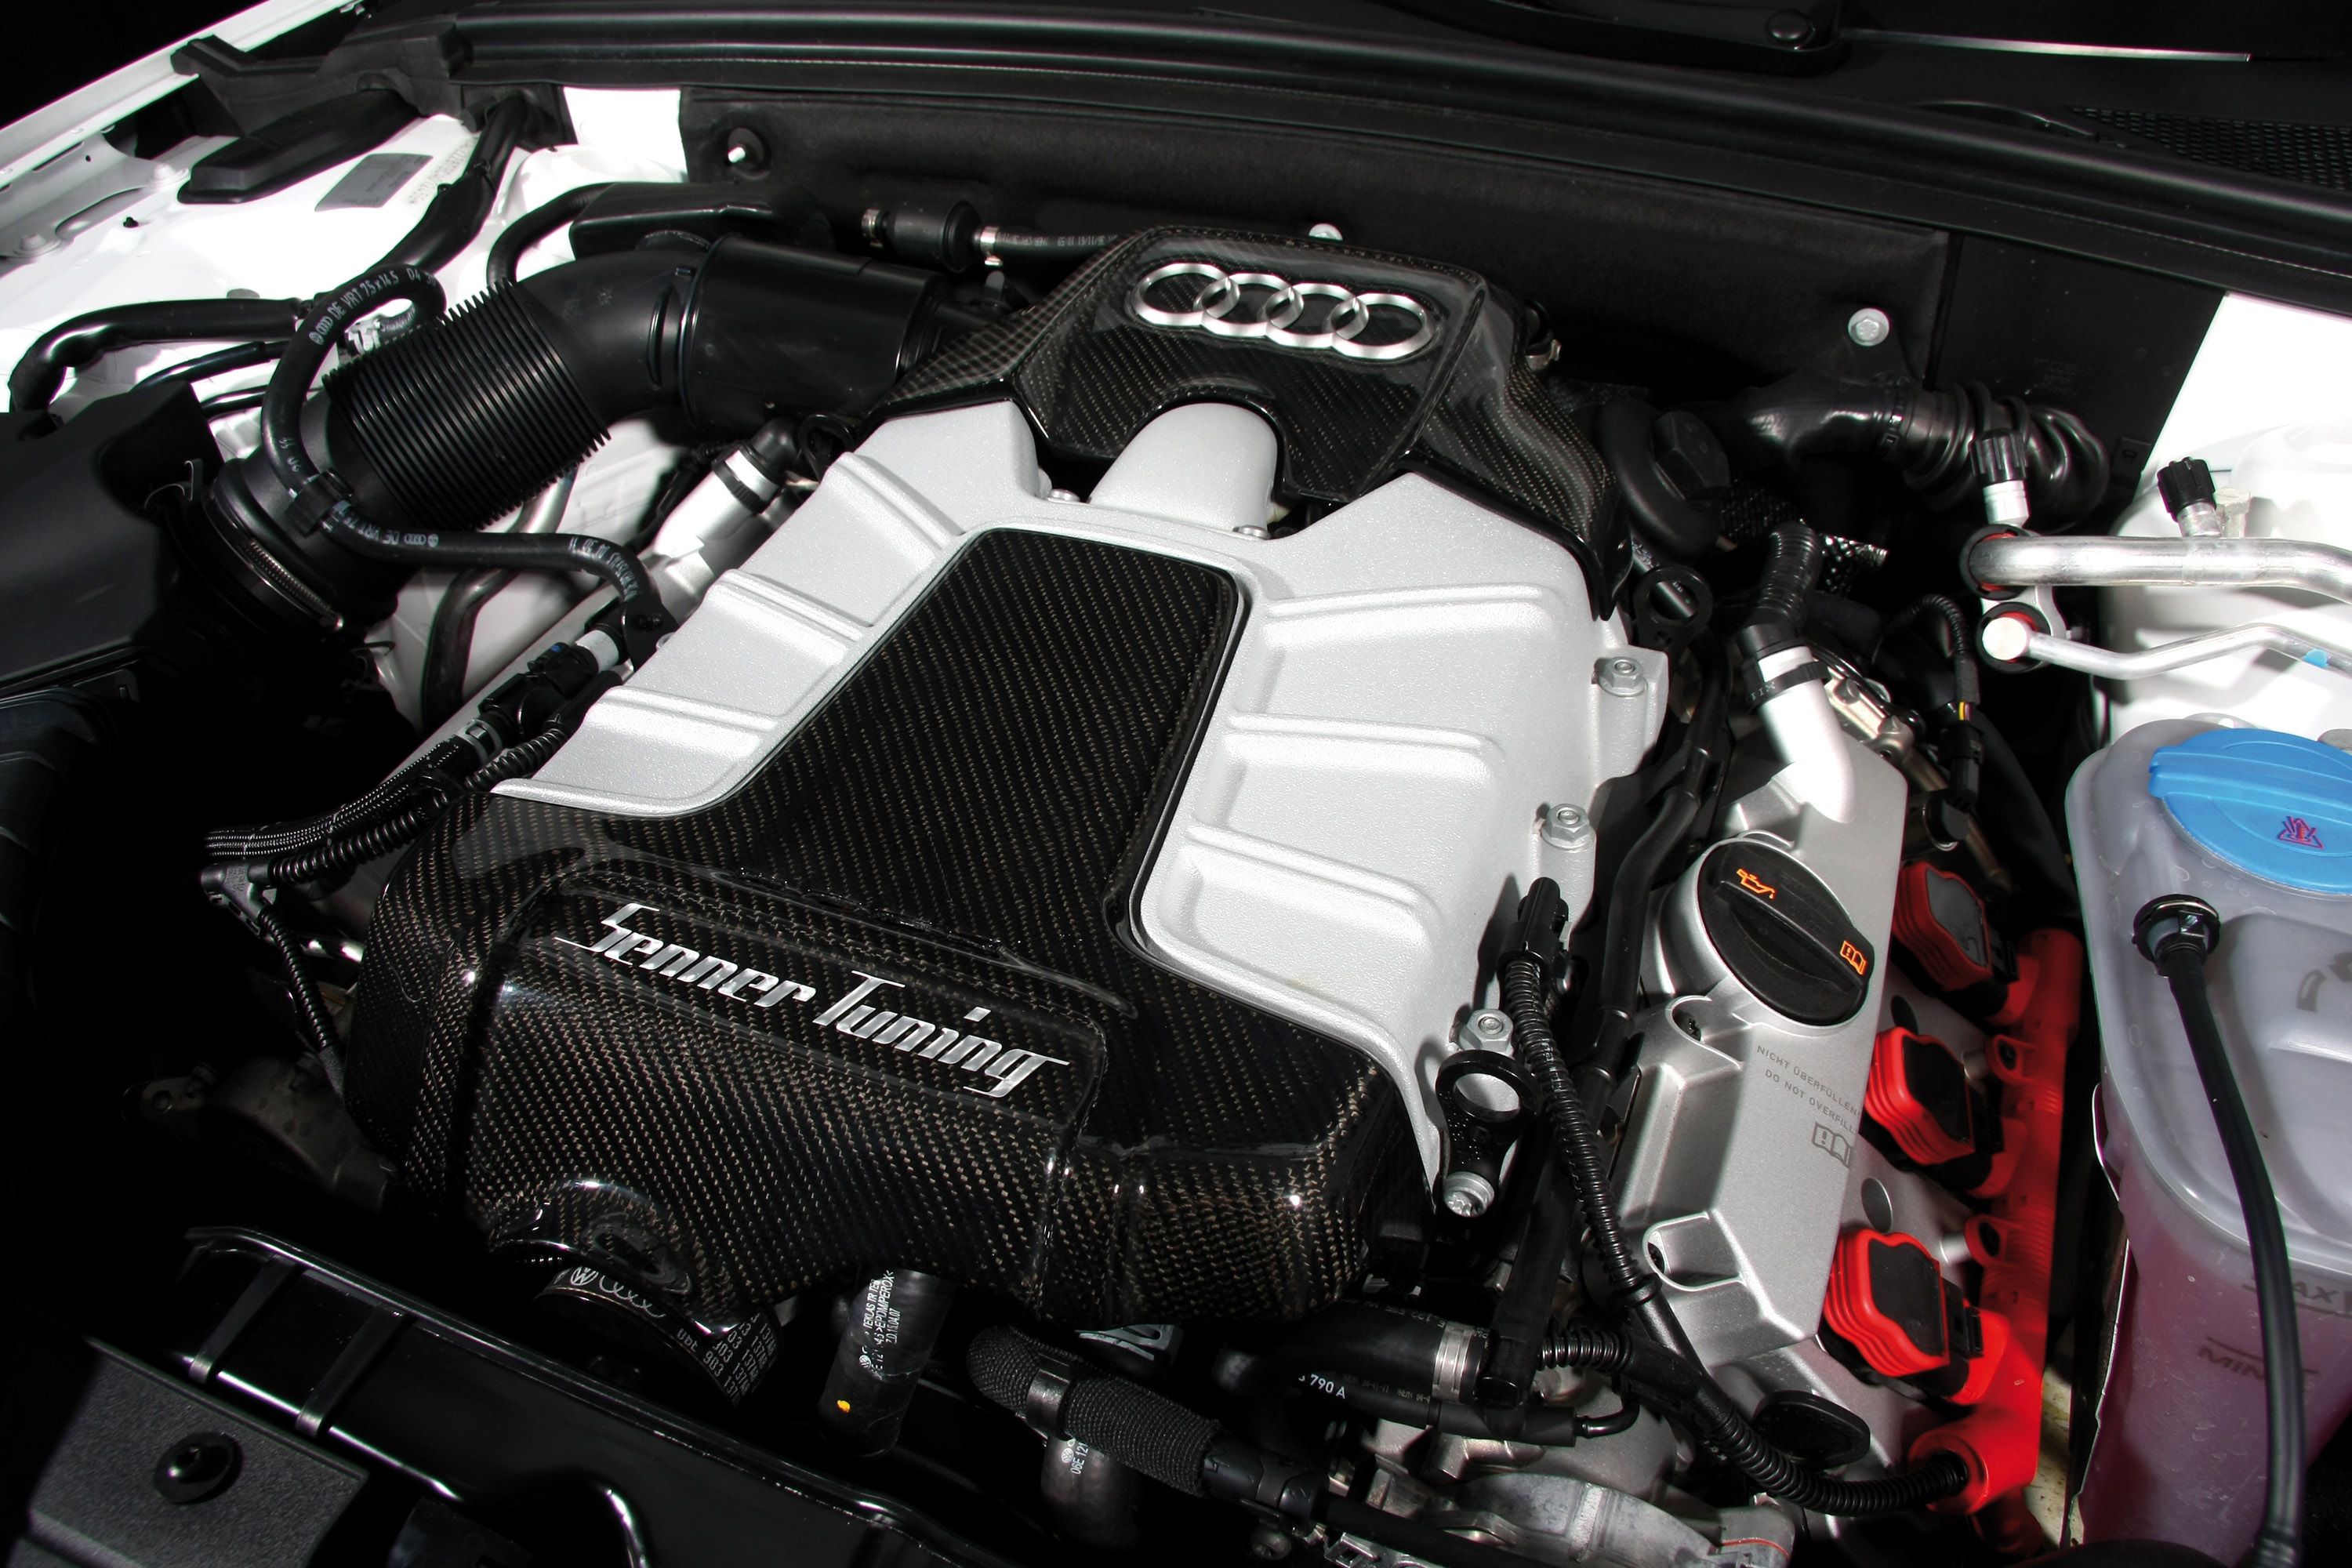 2012 Audi S5 Coupe by Senner Tuning